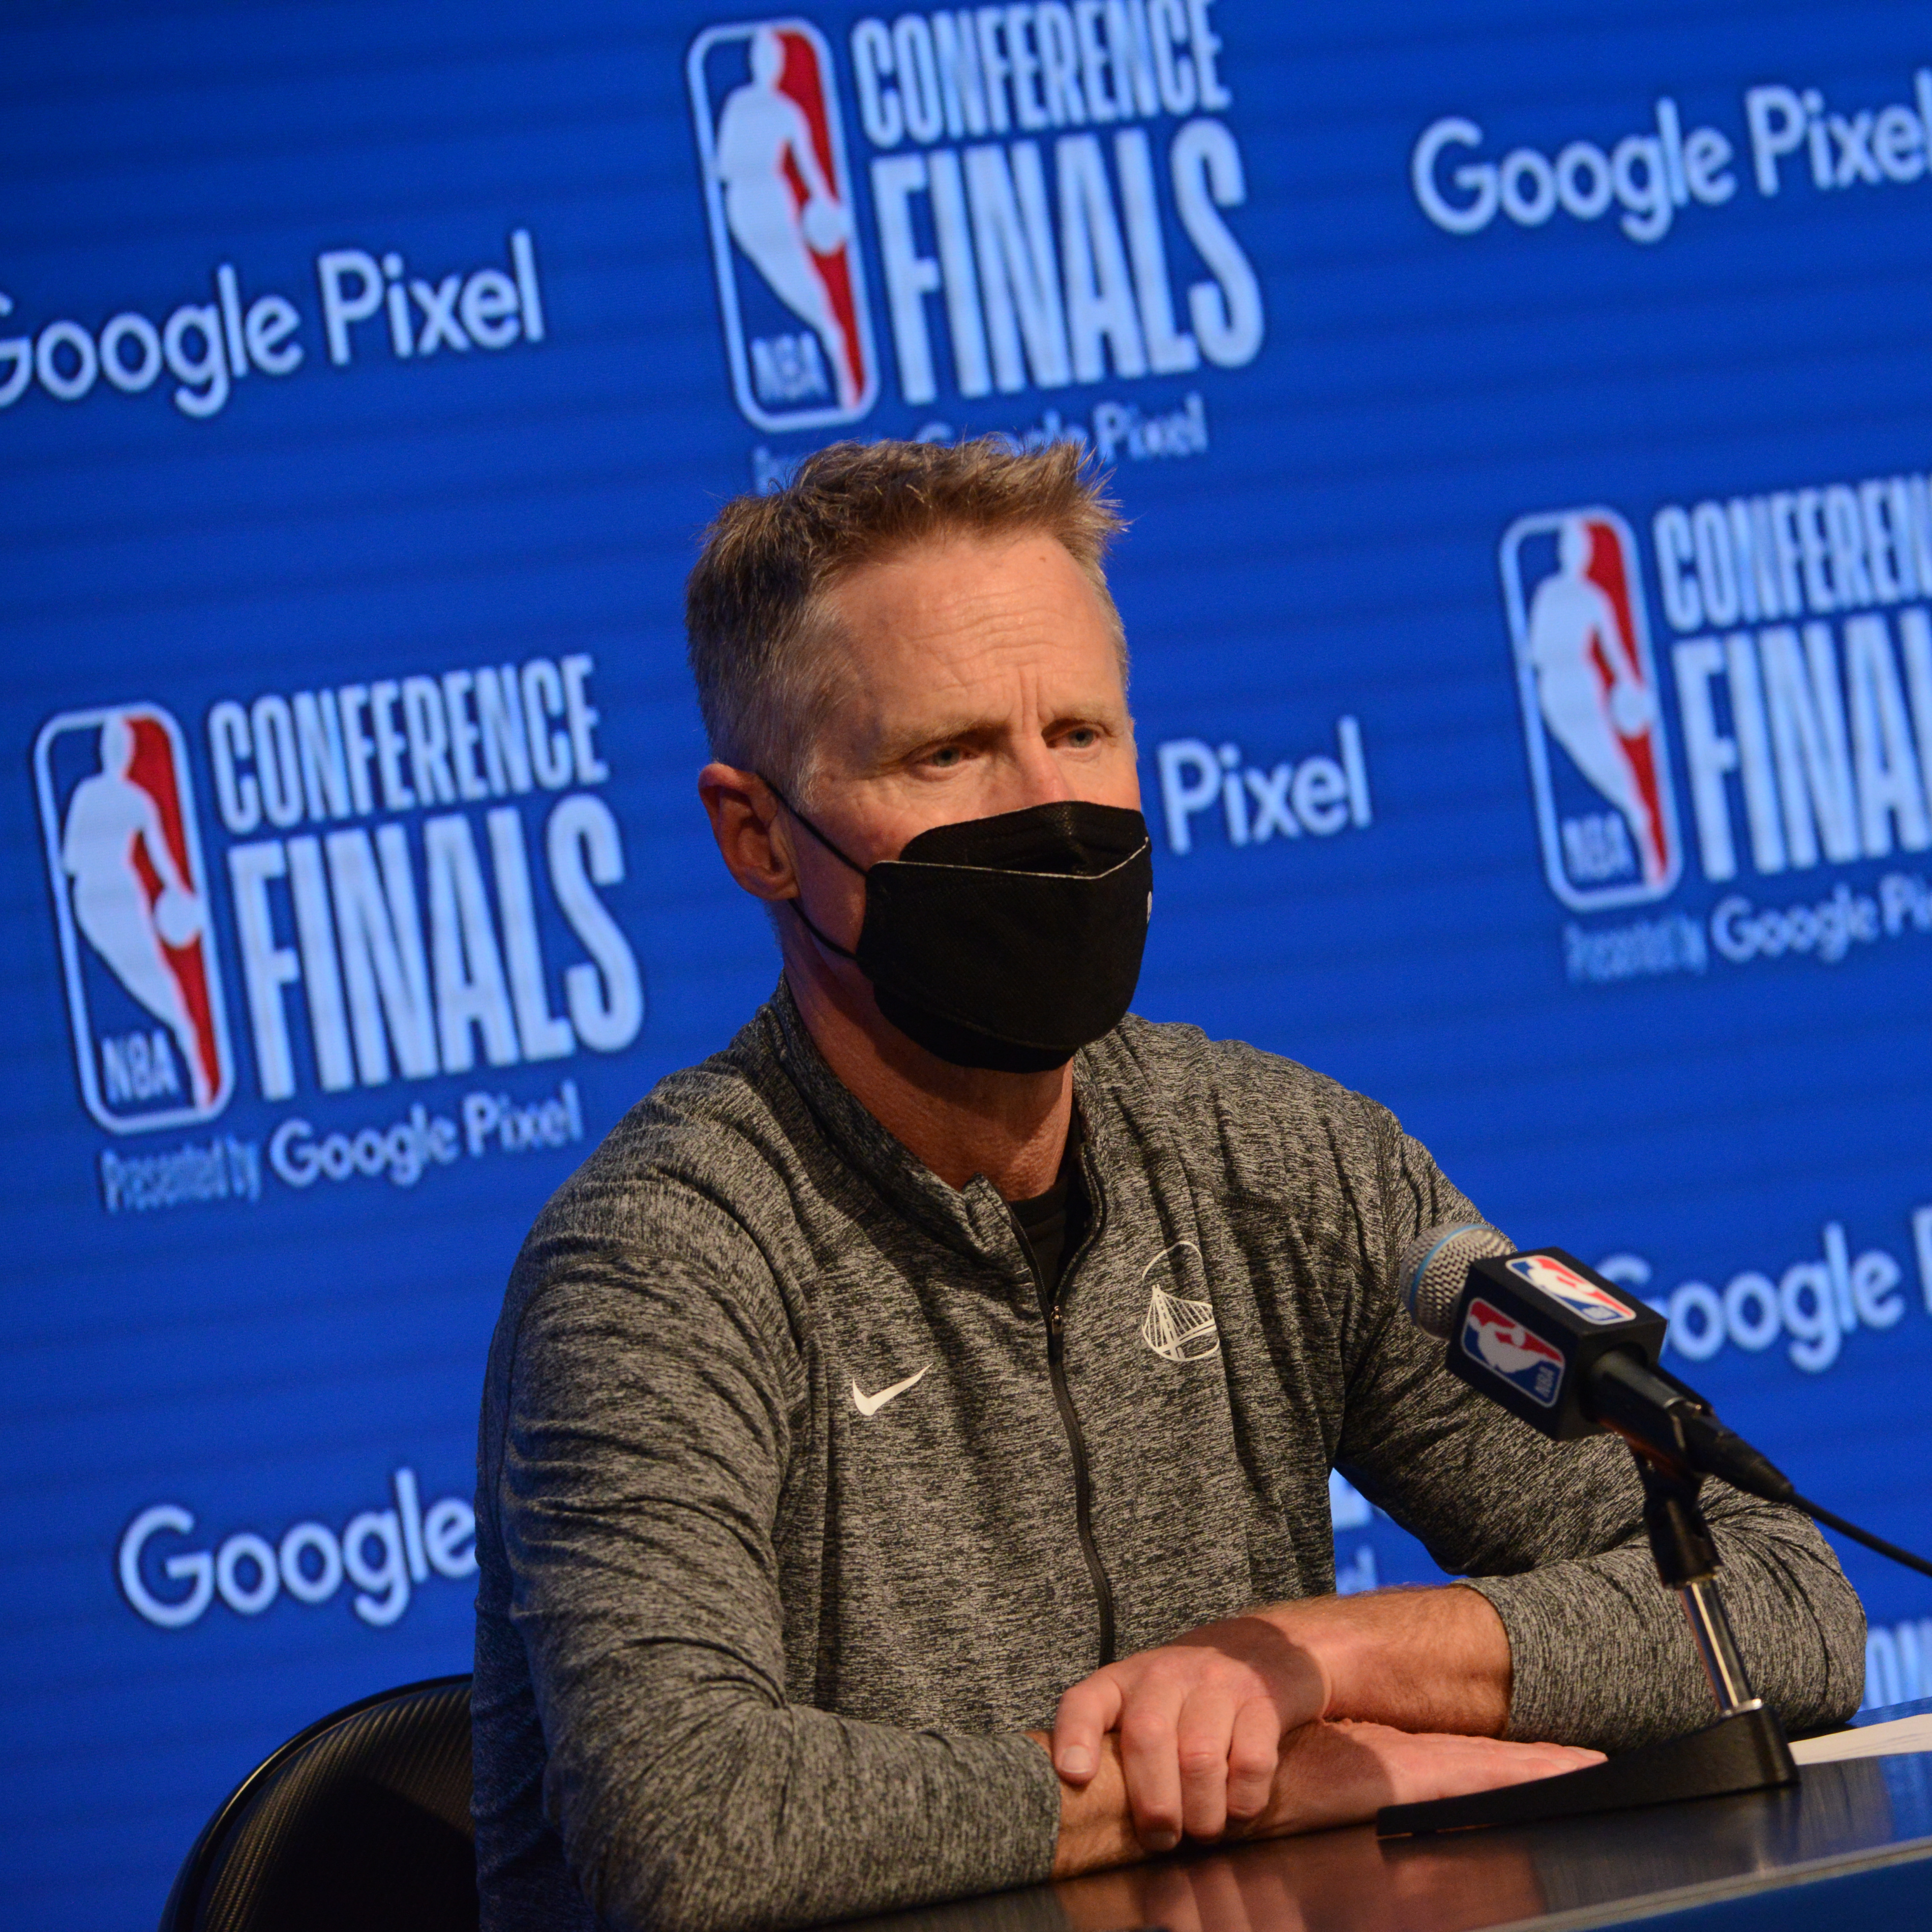 Steve Kerr Pleads for Gun Control in Passionate Speech After Uvalde Tragedy